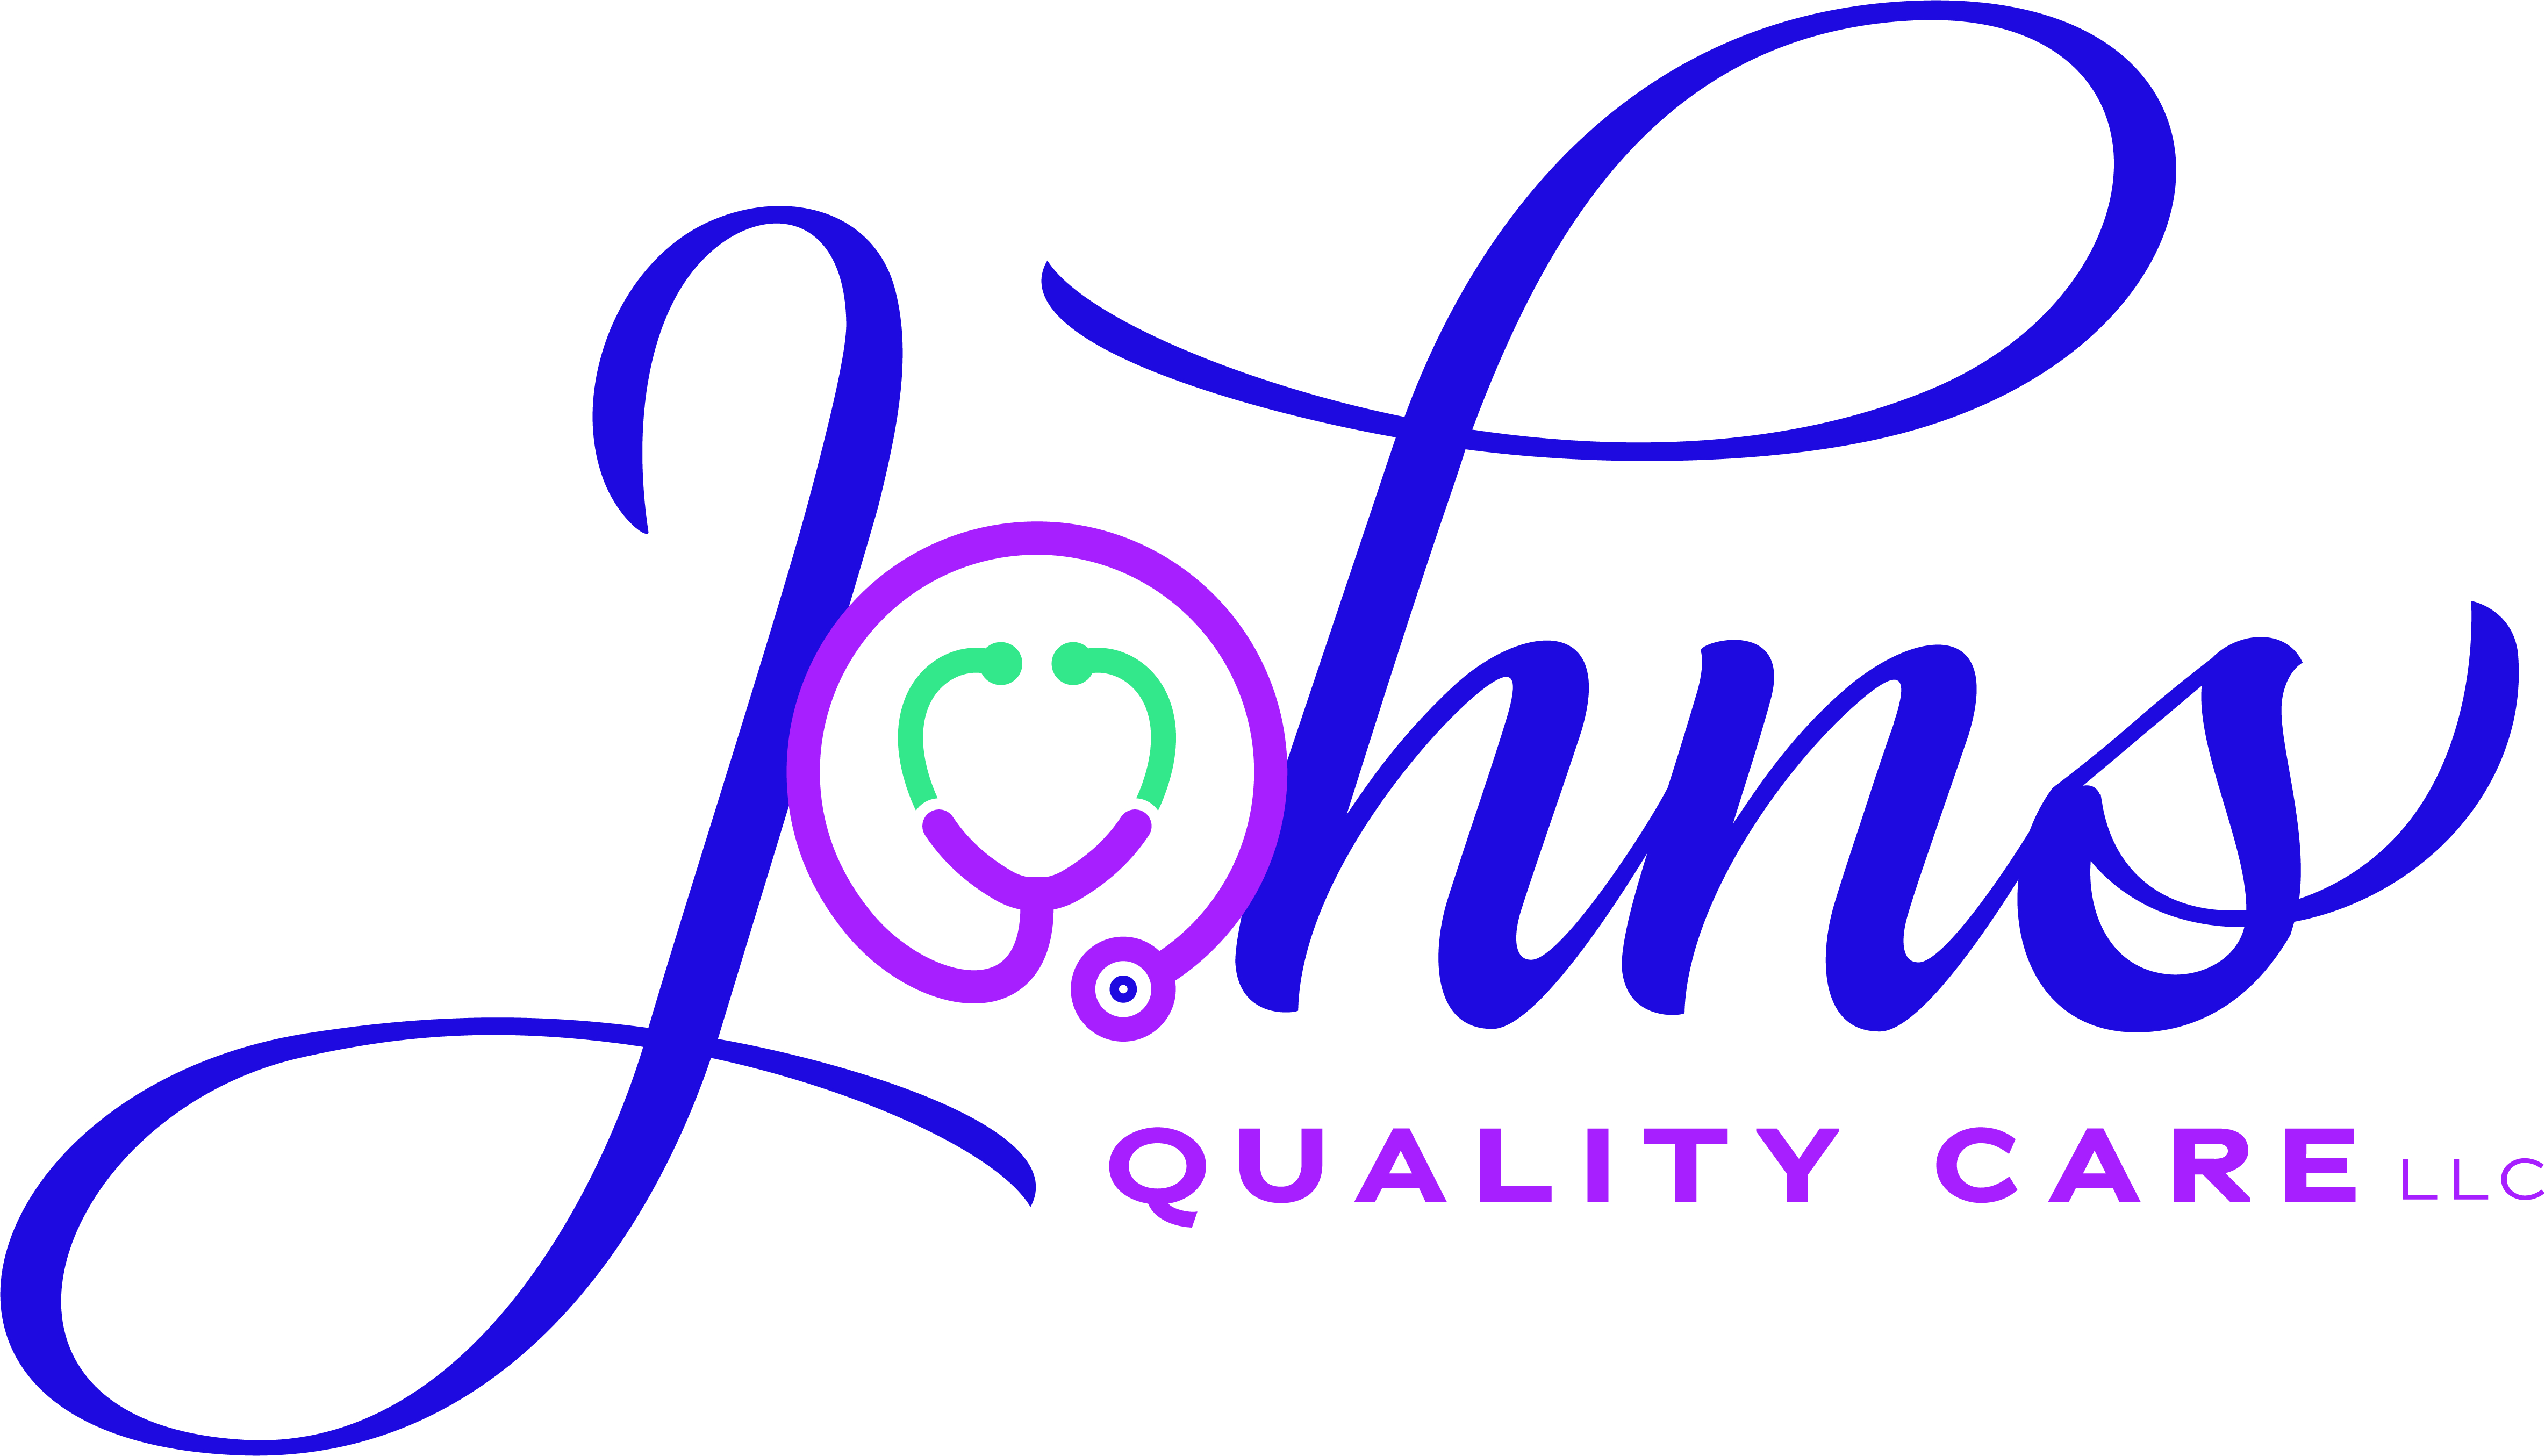 Johns Quality Care, LLC - Evansville, IN